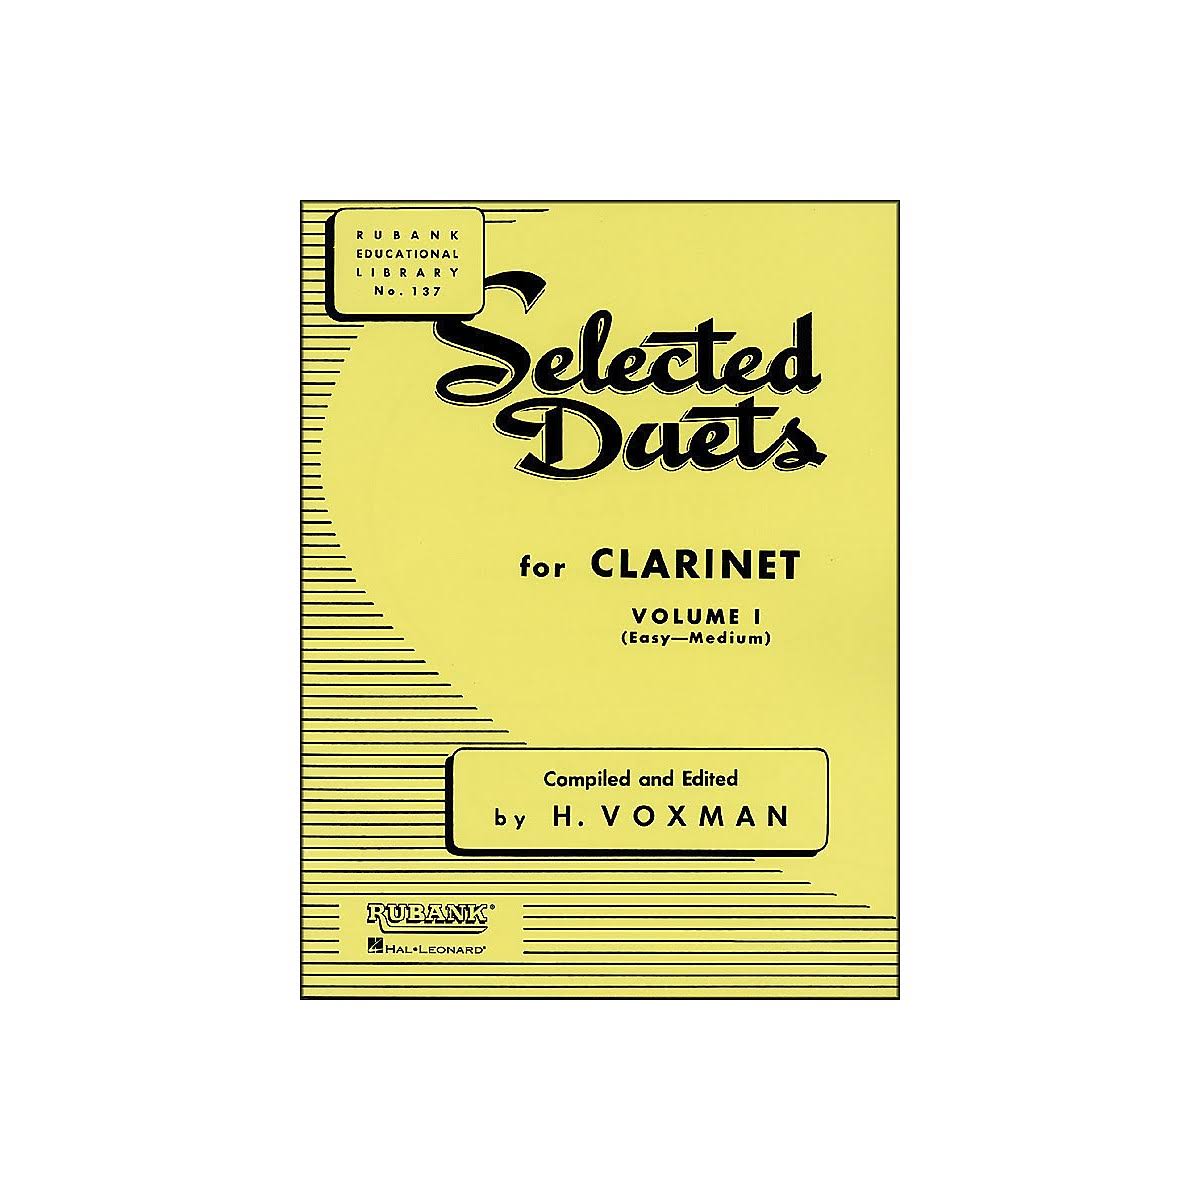 Selected Duets for Clarinet Volume 1: Easy to Medium - H. Voxman (ed)